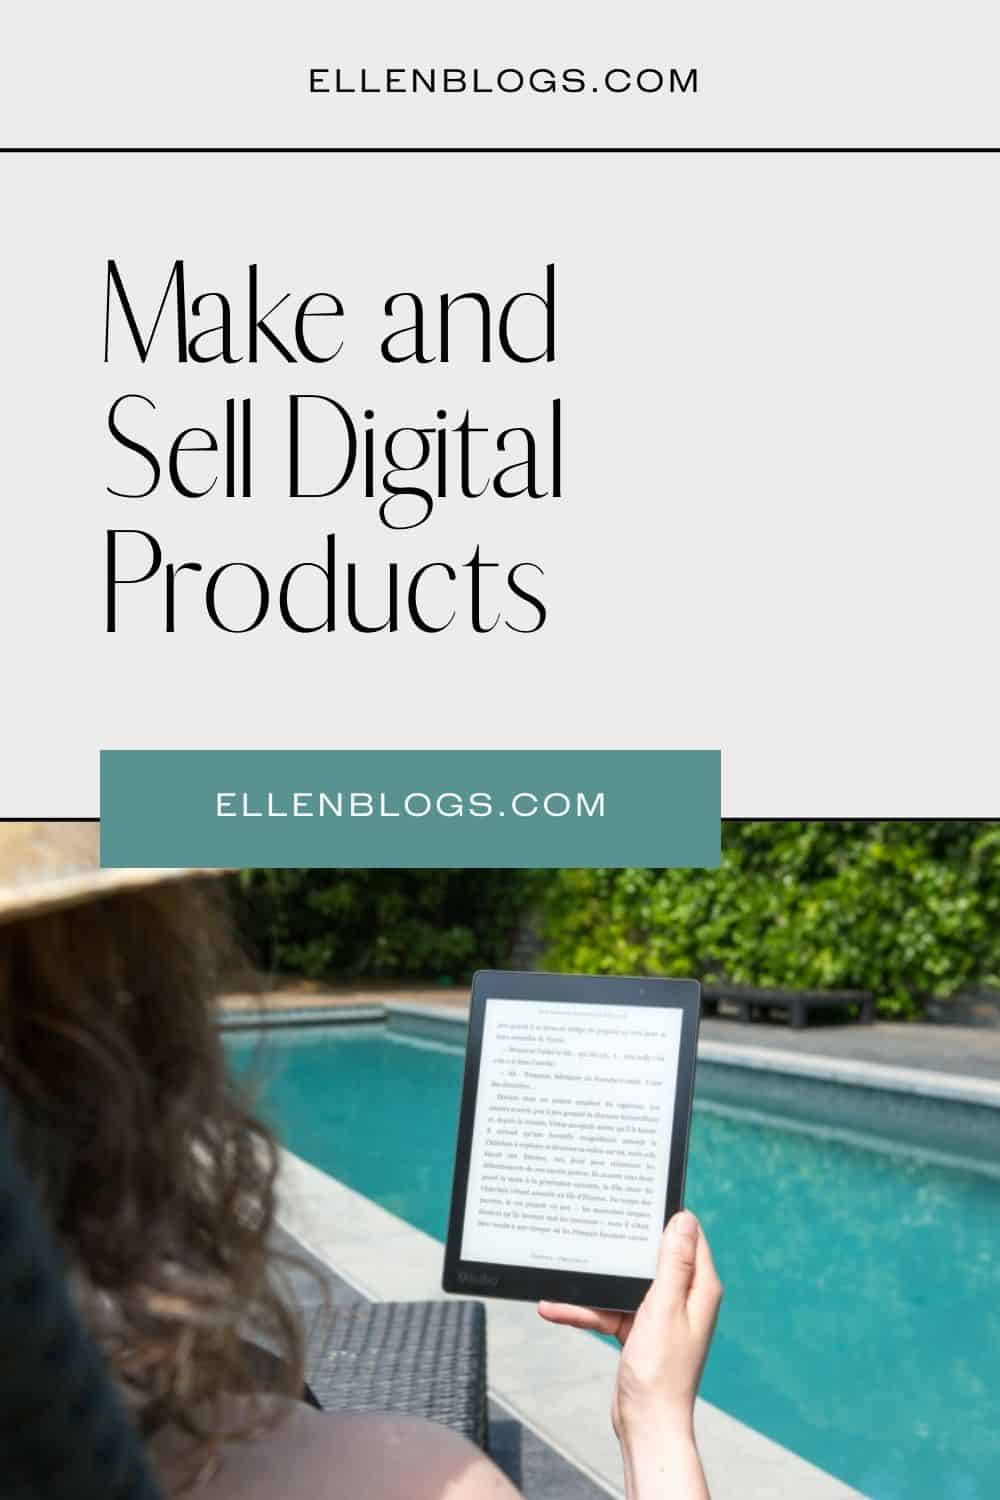 Selling digital products on your blog is hard, right? Learn how to make and sell digital products on your WordPress blog with this helpful guide.